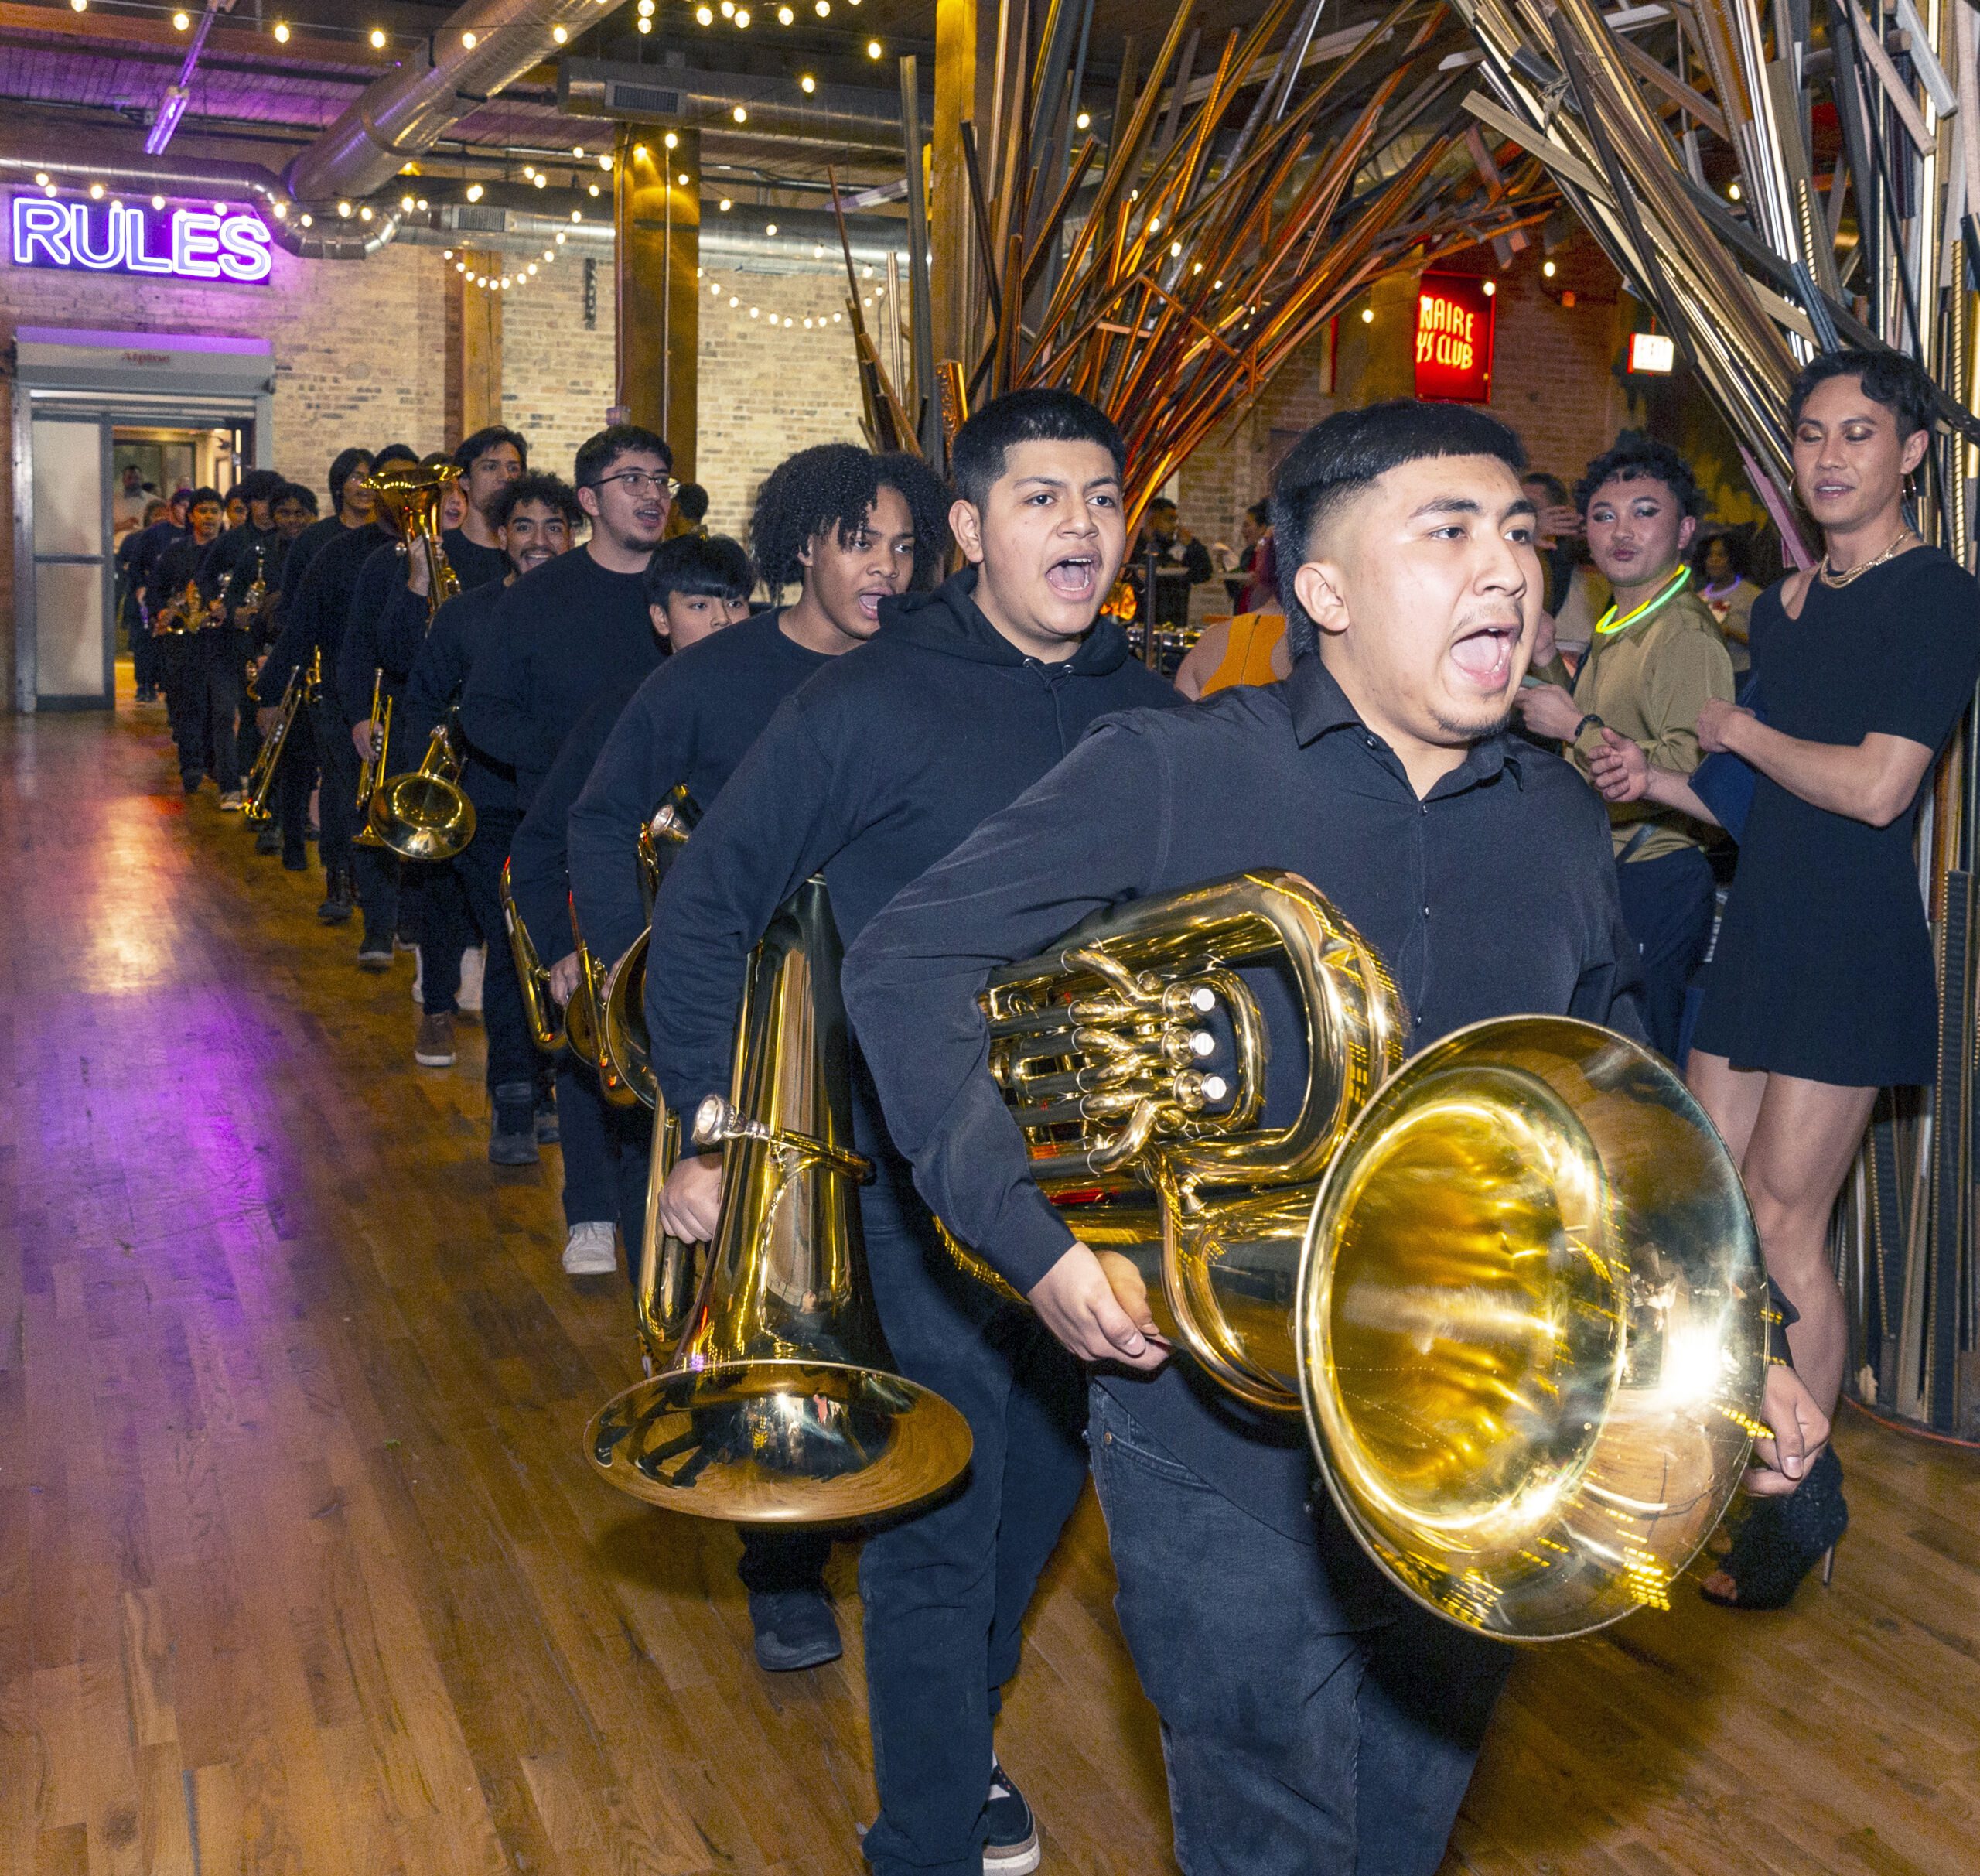 Tuba players, in a line, as they go about their performance. The first Tuba player, Fabian, is wearing a long black button up shirt and black dress pants. All the Tuba players behind are also wearing the same clothes. They are in a party hall with bright lights and golden decor.